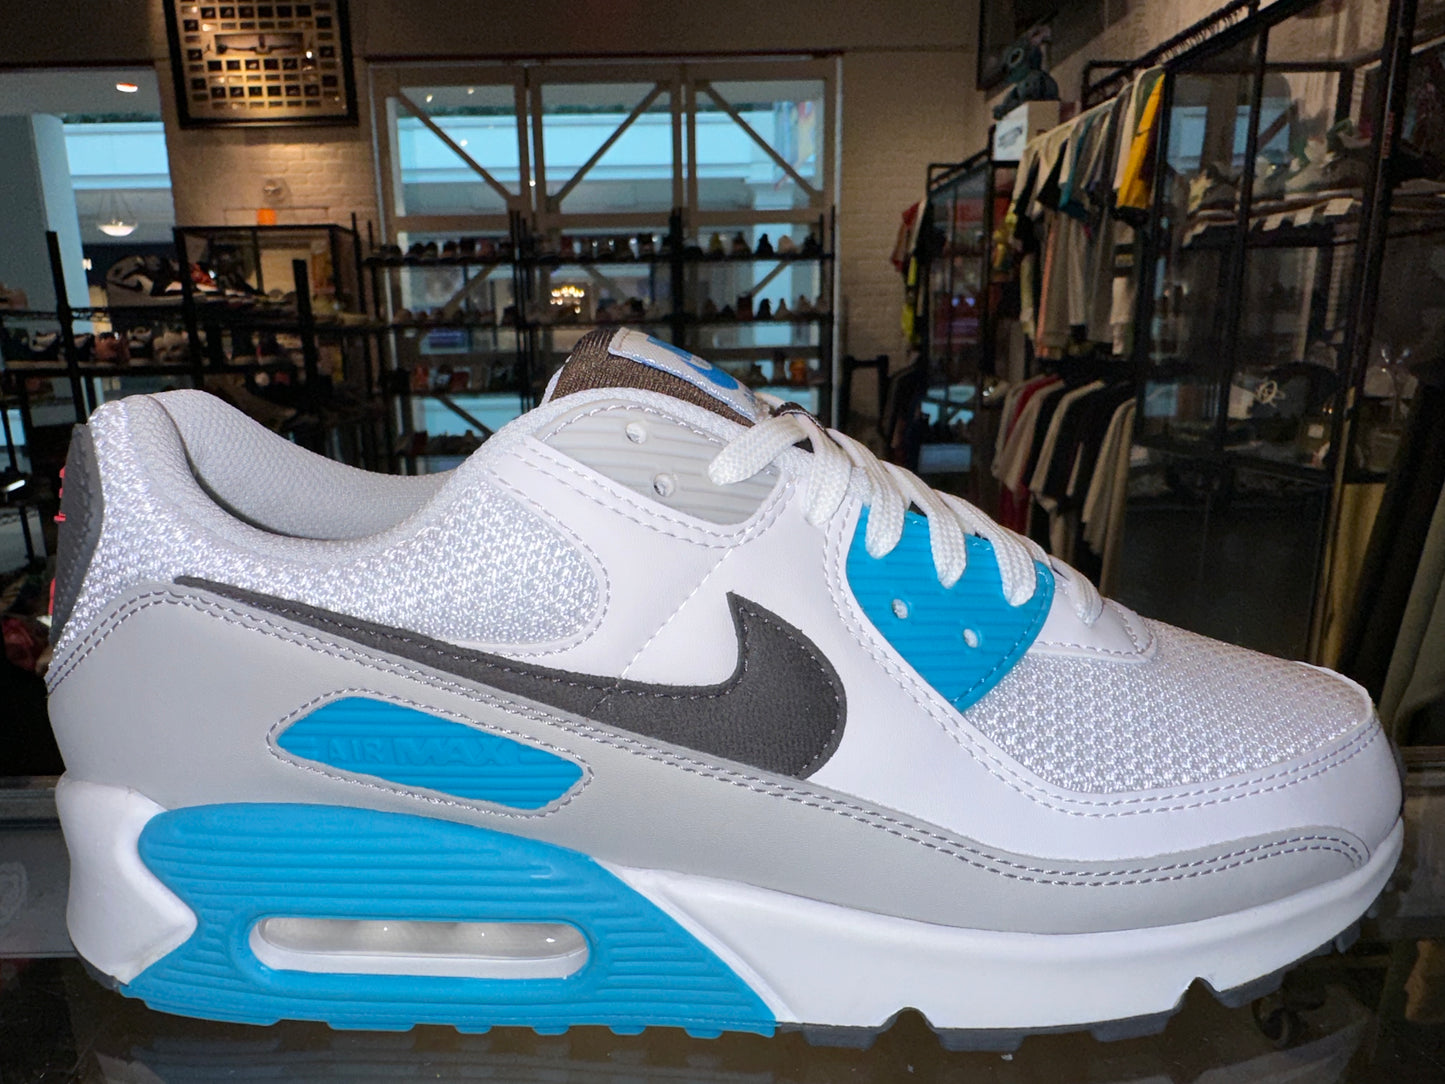 Size 9 Air Max 90 “Chlorine Blue” Brand New (Mall)